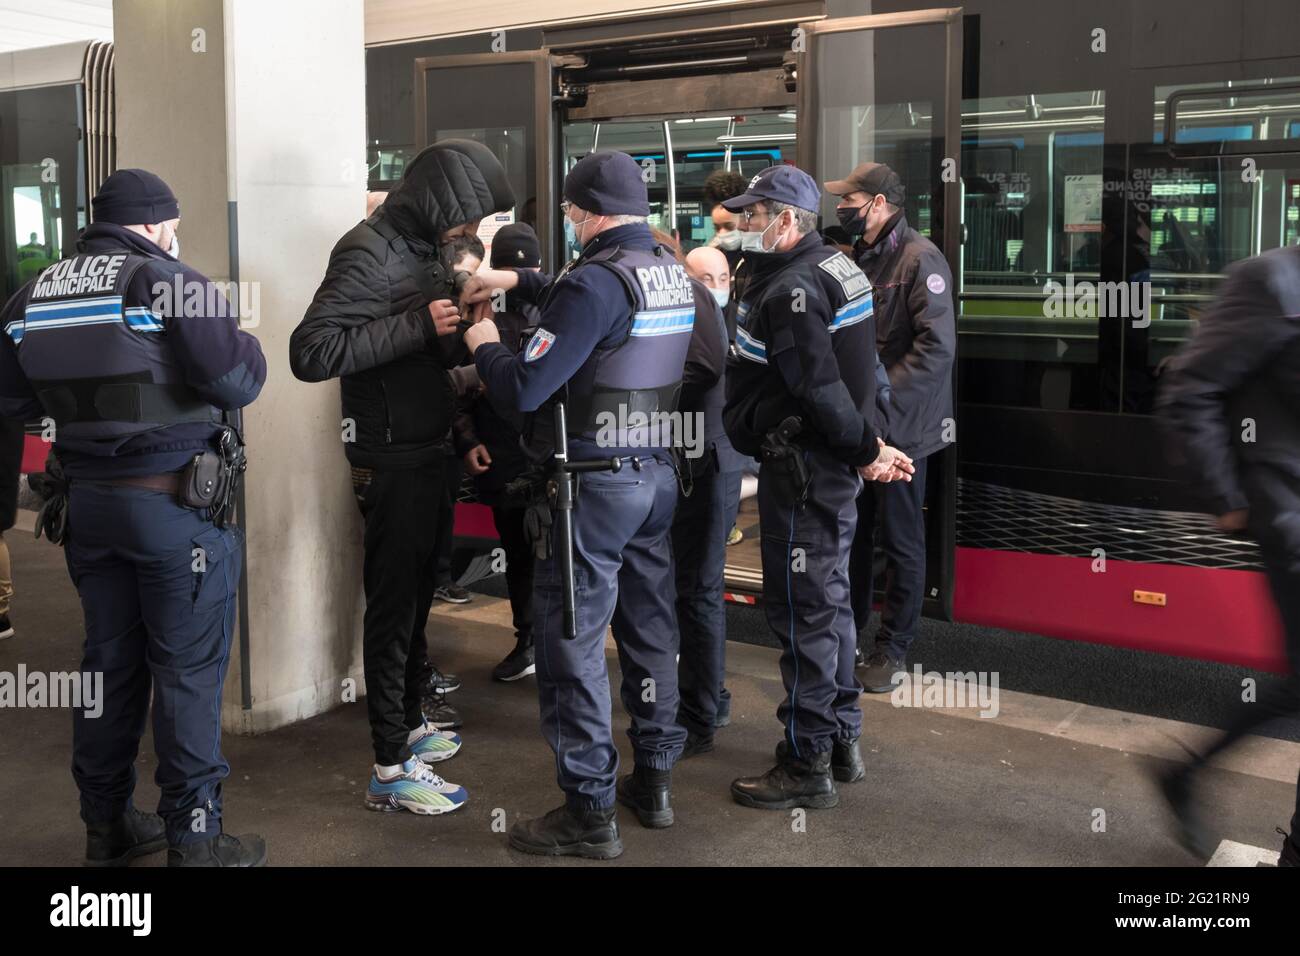 Marseille, France. 19th Jan, 2021. Police officers in their uniforms seen  in action during law enforcement and security operations in Marseille.Since  the beginning of 2021, the Prefecture of Police has reinforced the